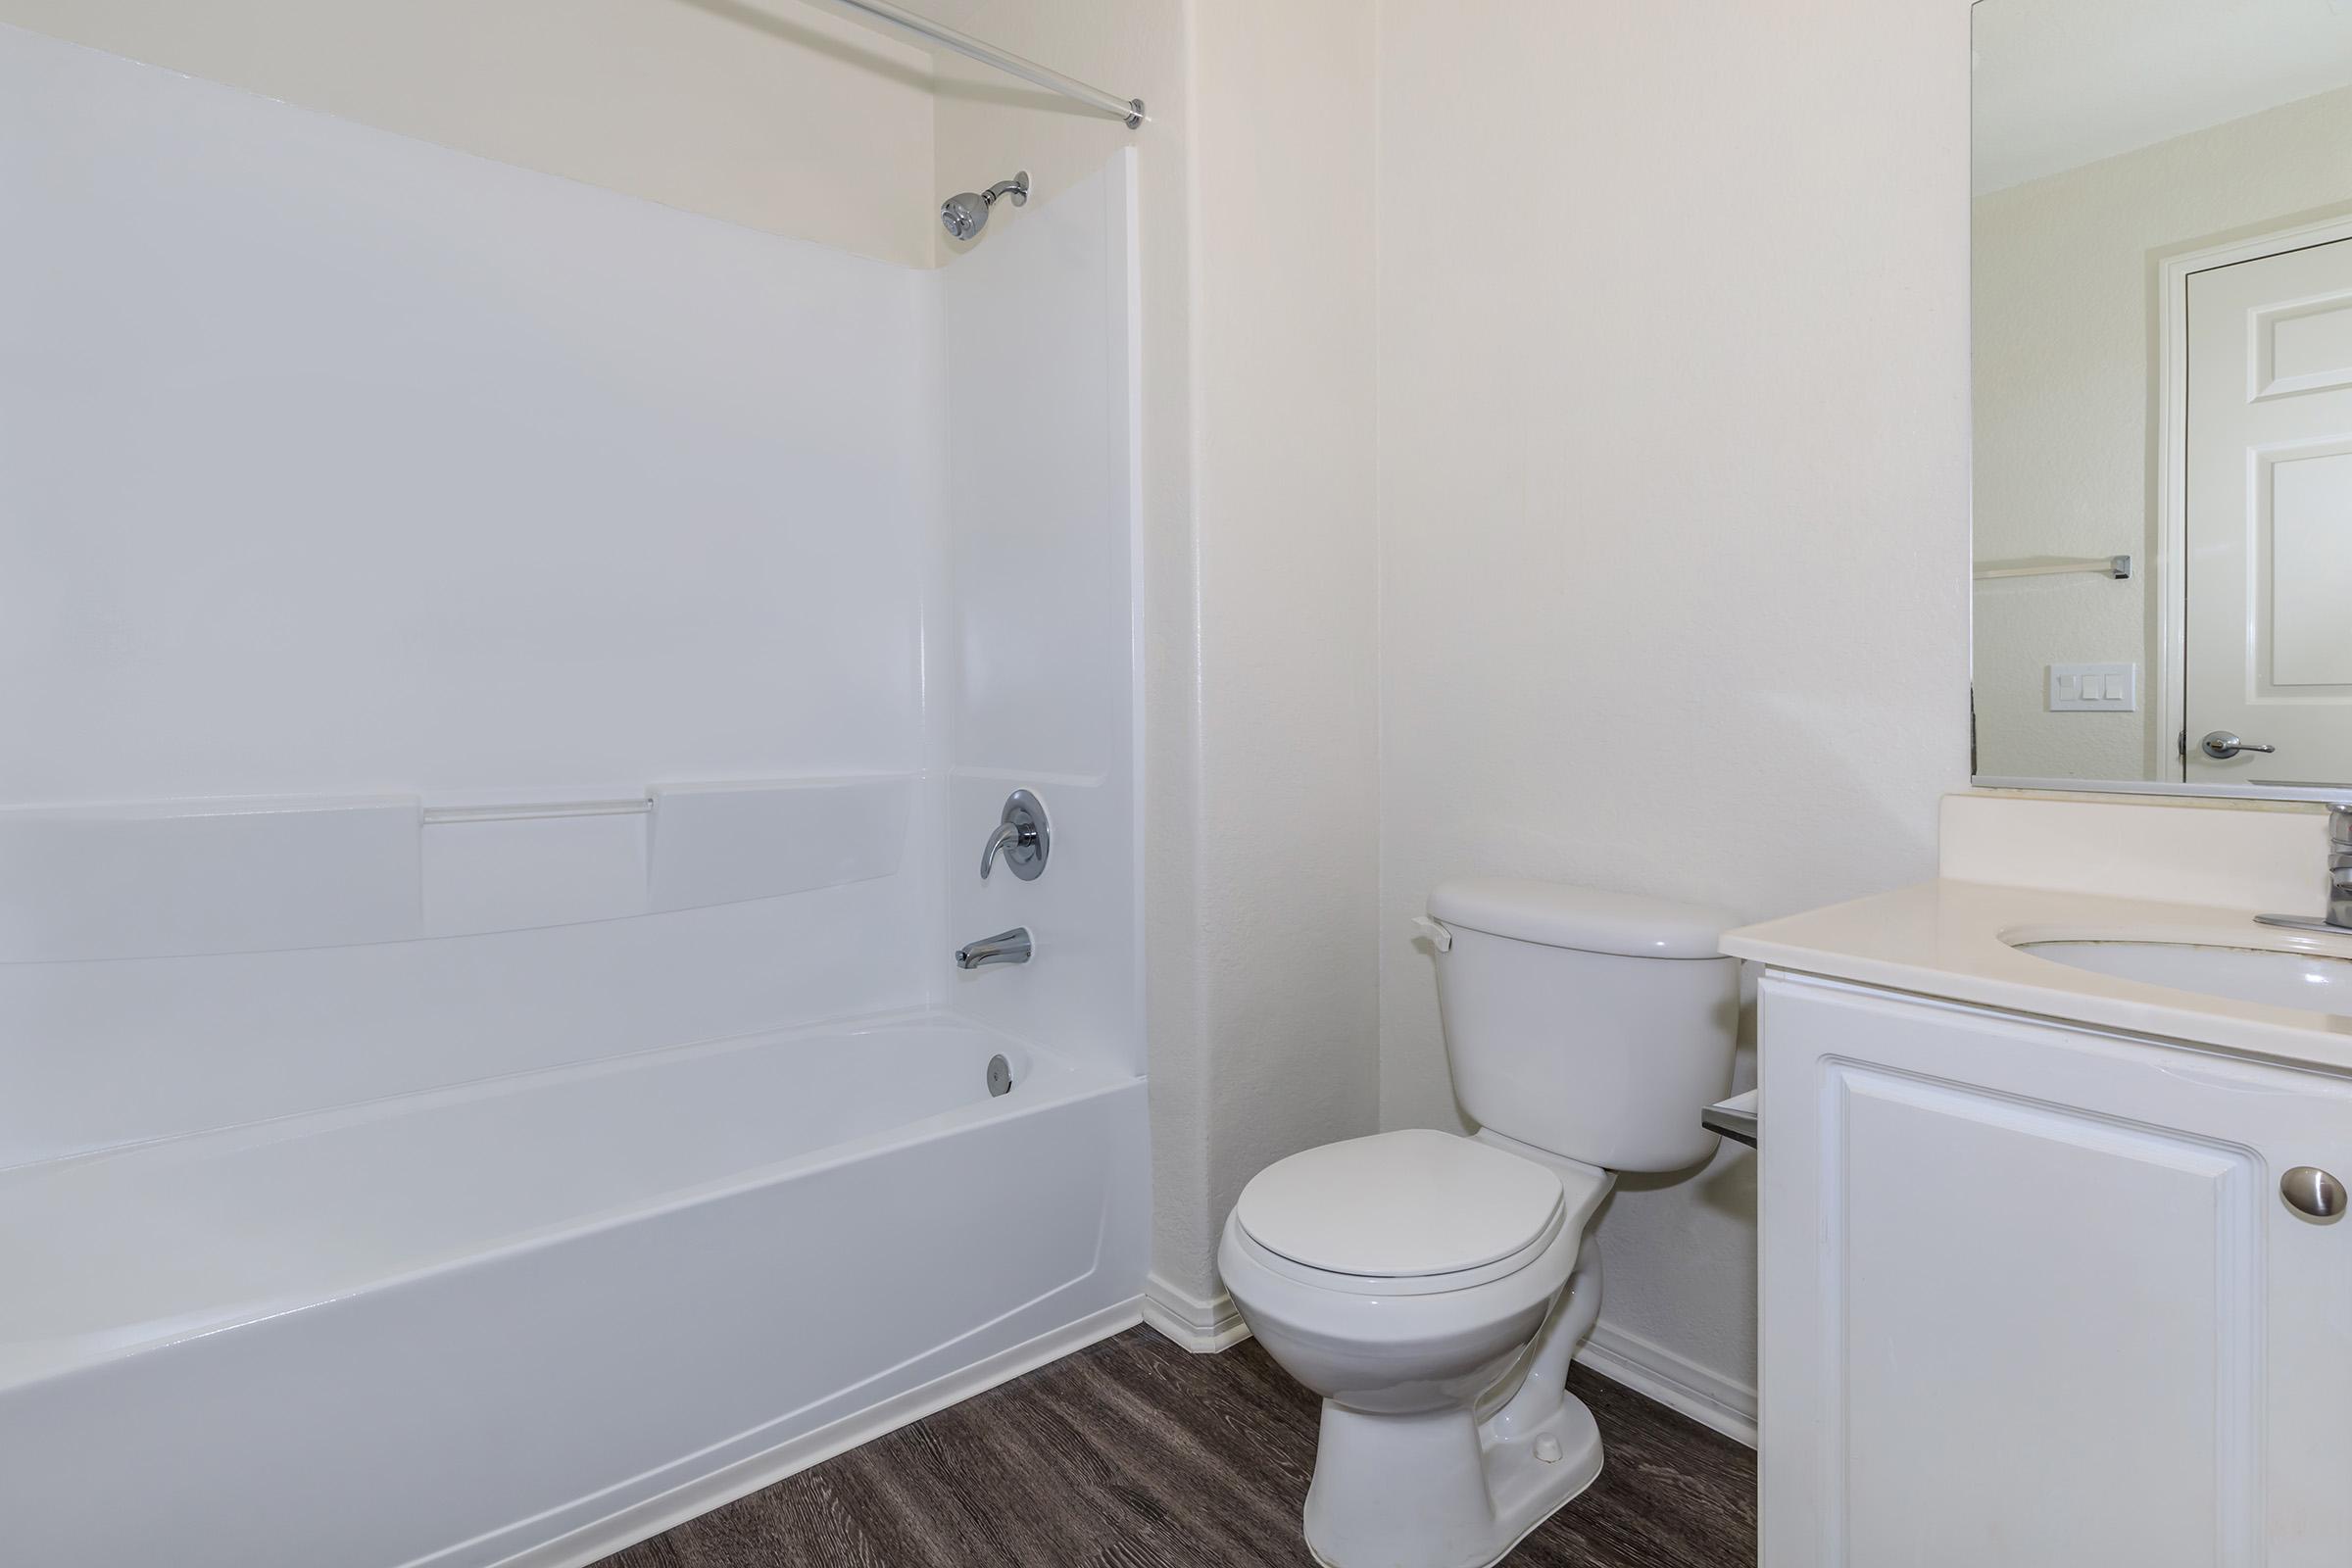 Laurel Glen Apartment Homes has all in-one shower and bath combo